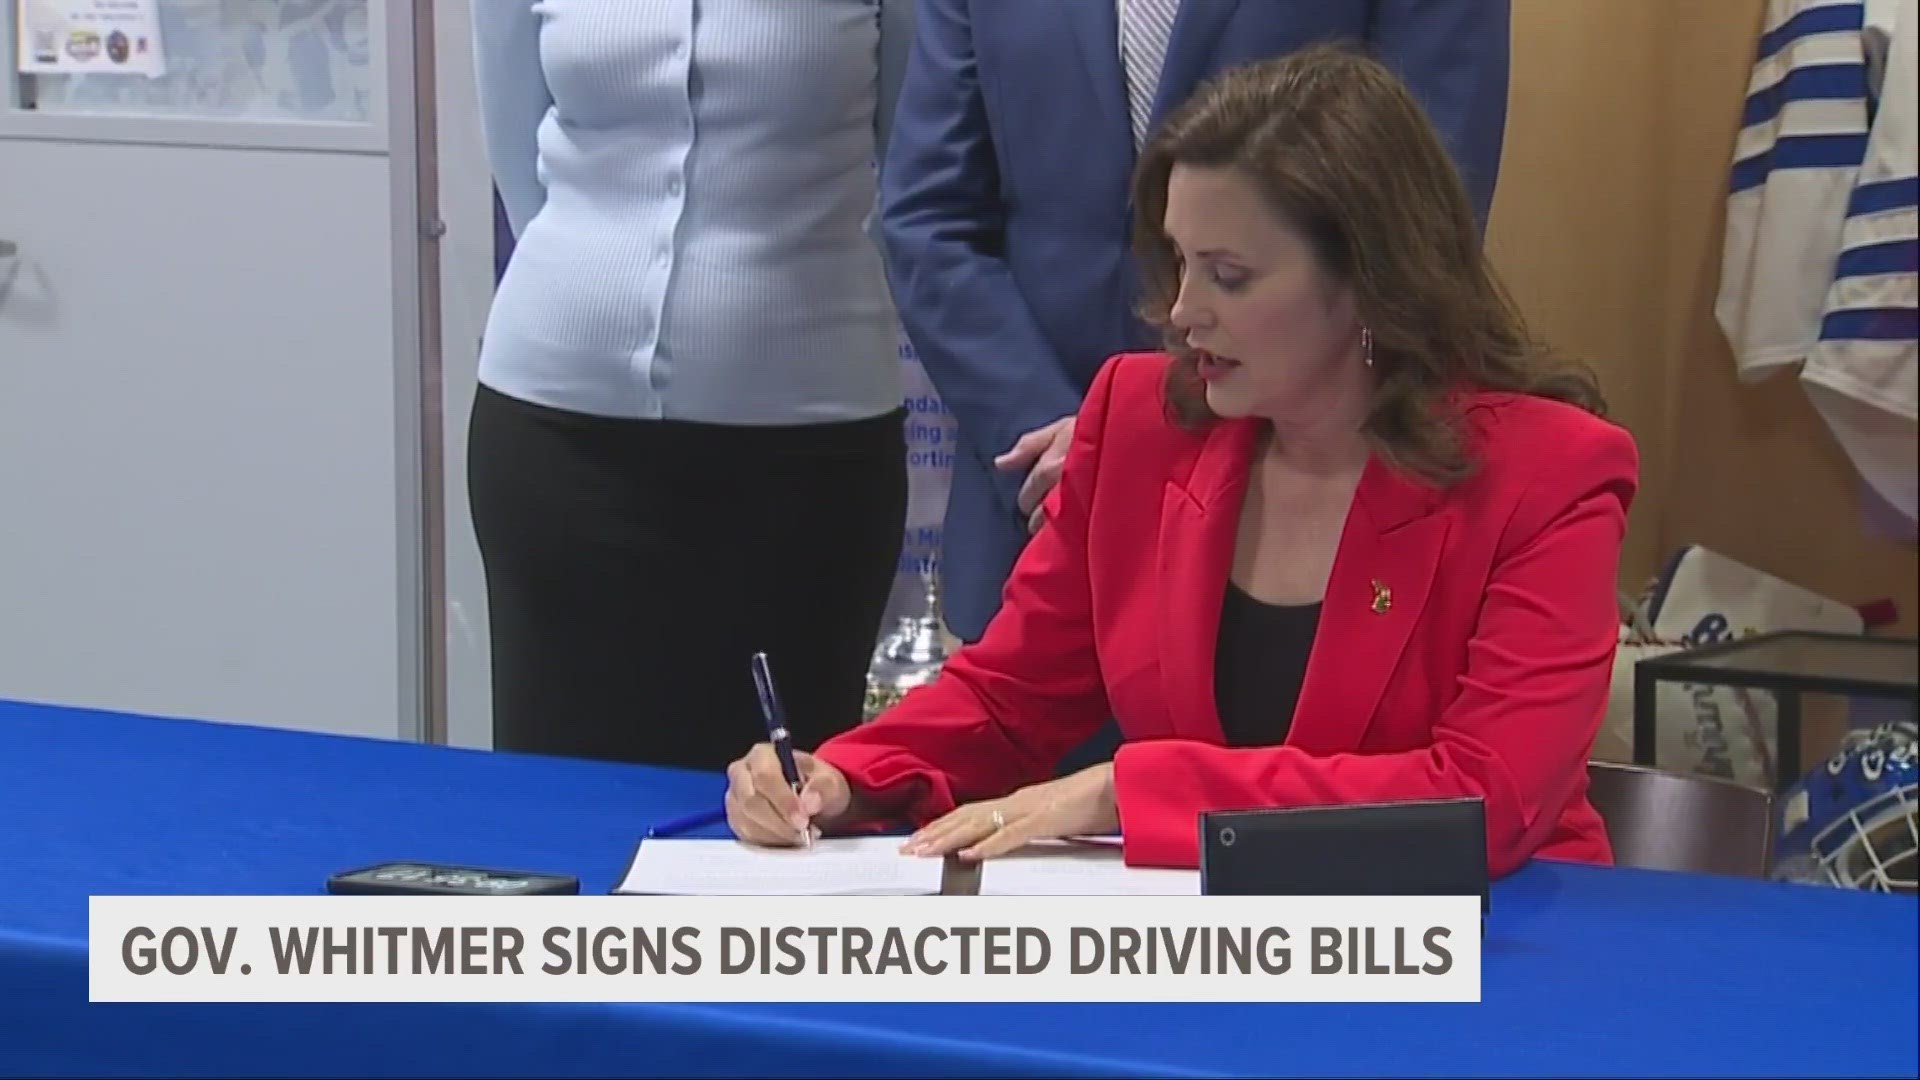 The bills prohibit streaming, making video calls or using social media while driving a car.